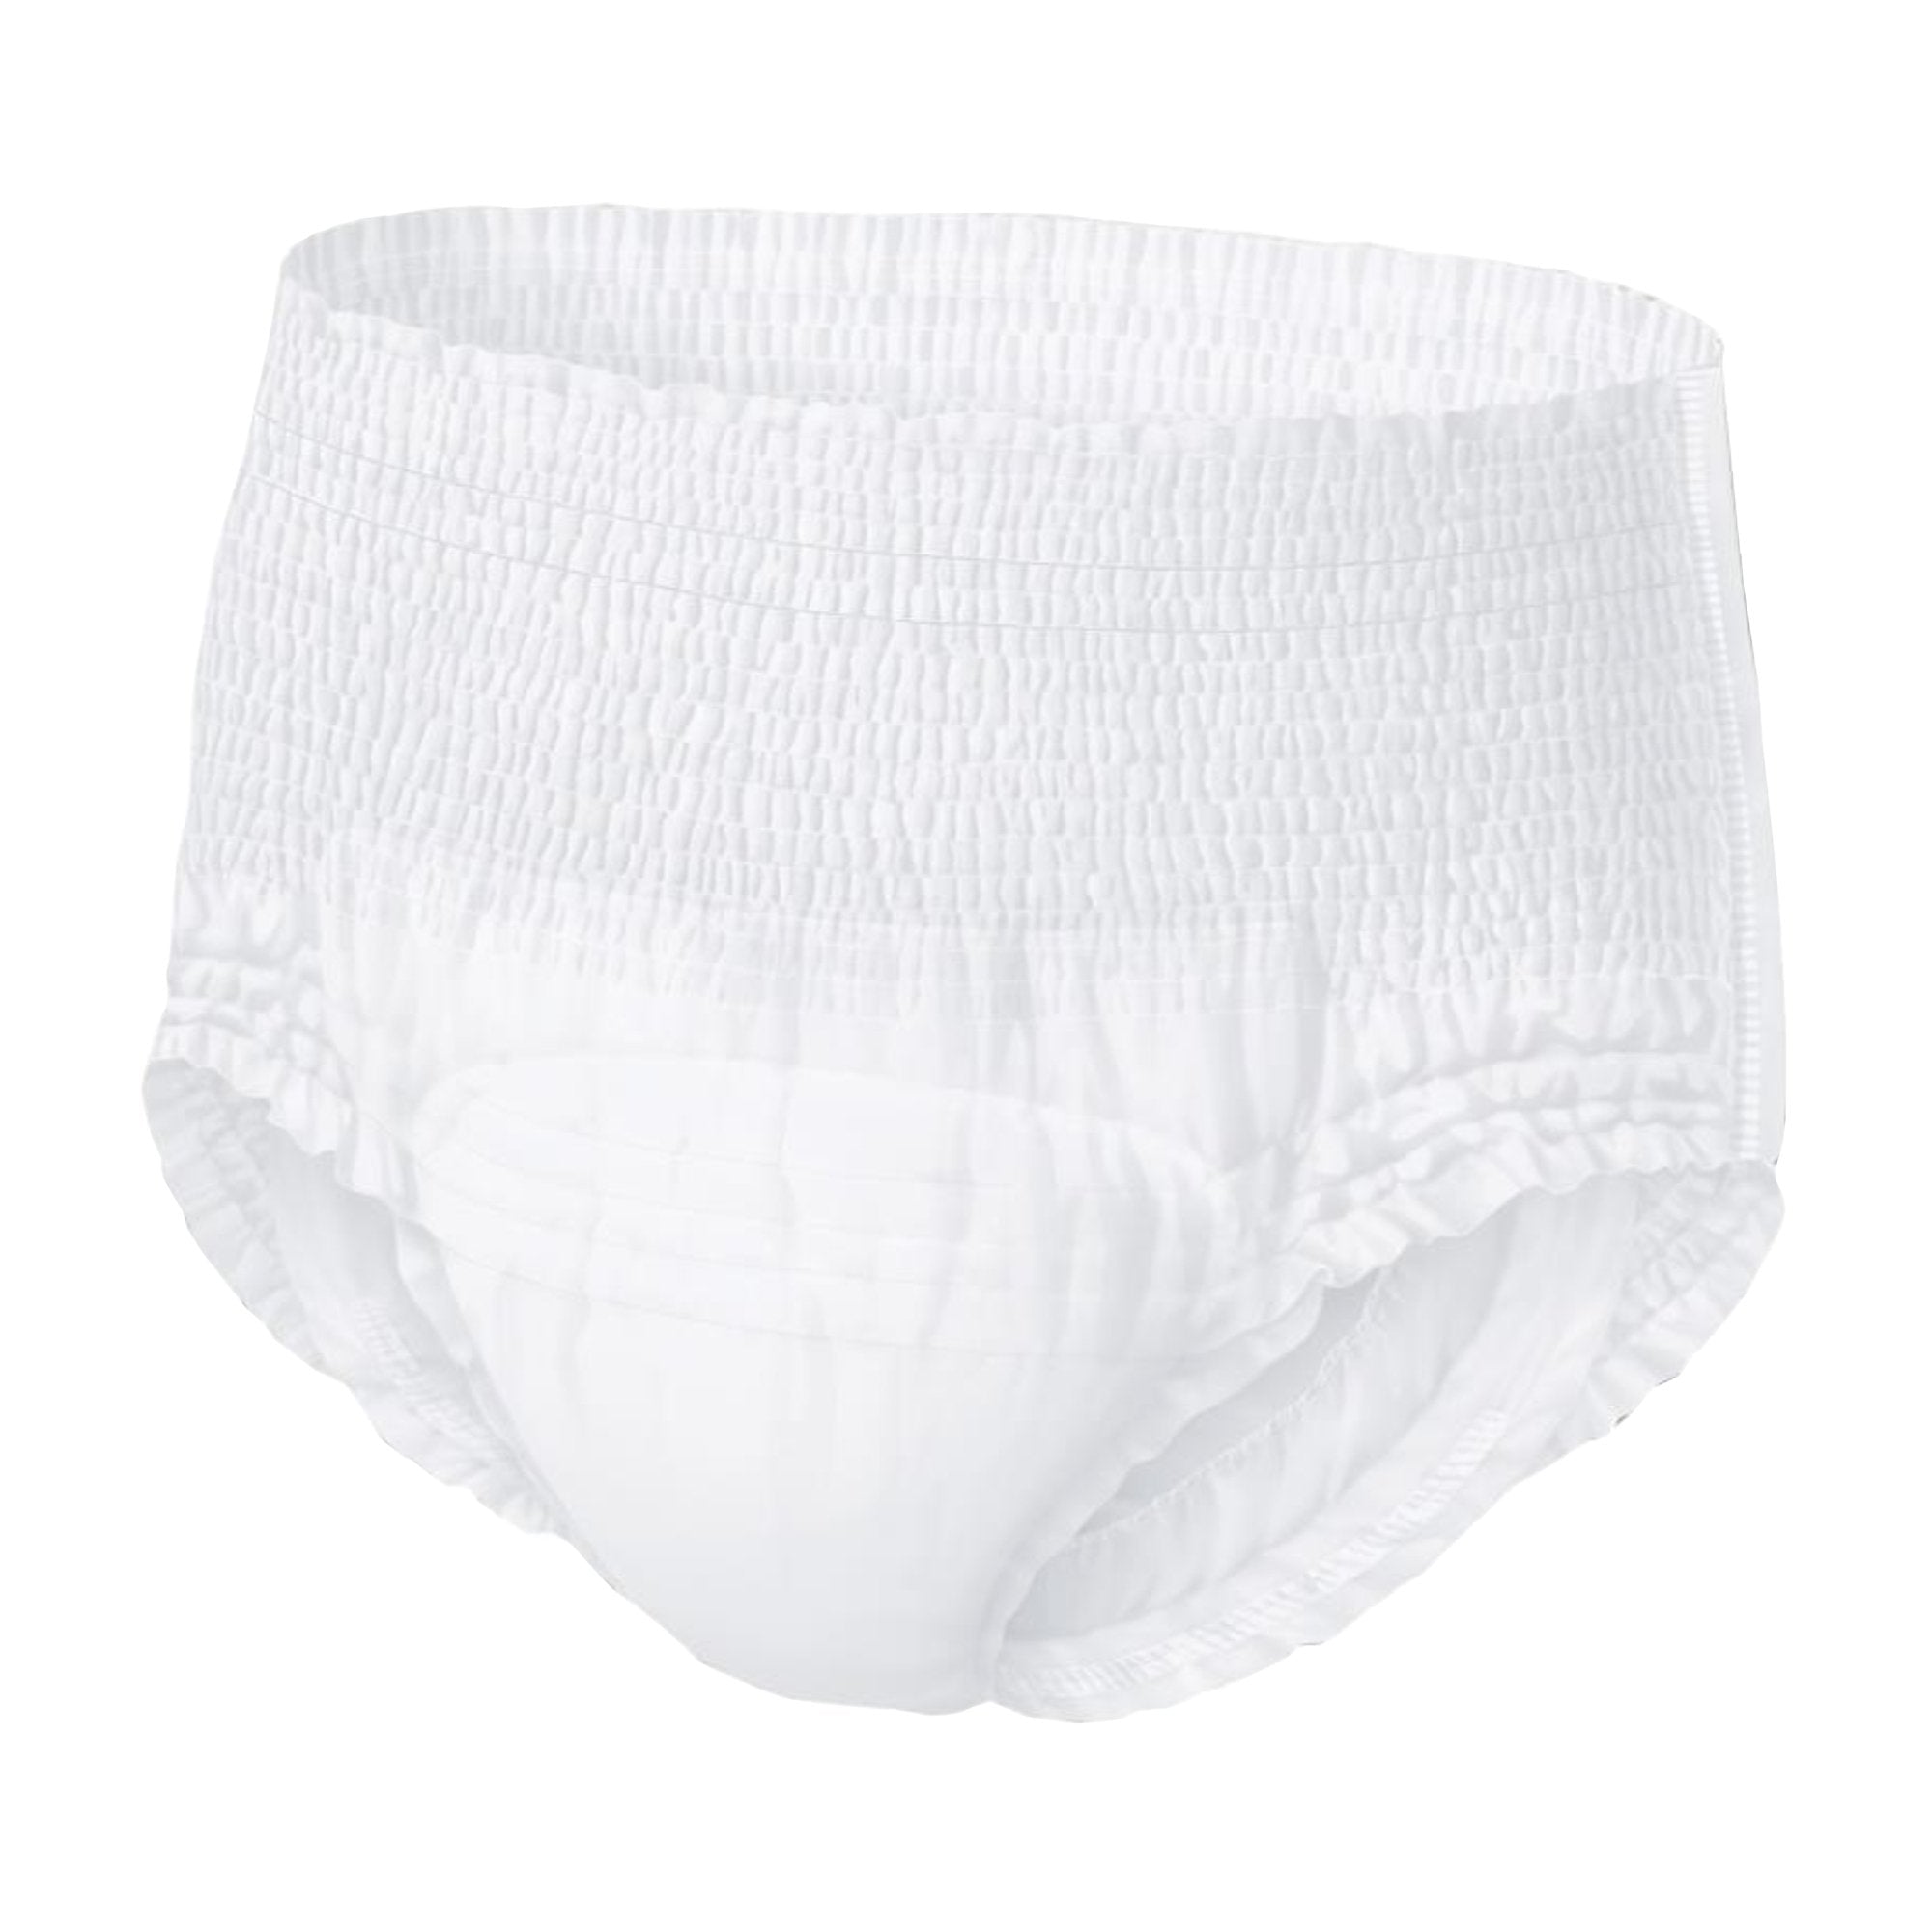 Unisex Adult Absorbent Underwear Abena Delta-Flex L1 Pull On with Tear Away Seams Medium / Large Disposable Moderate Absorbency